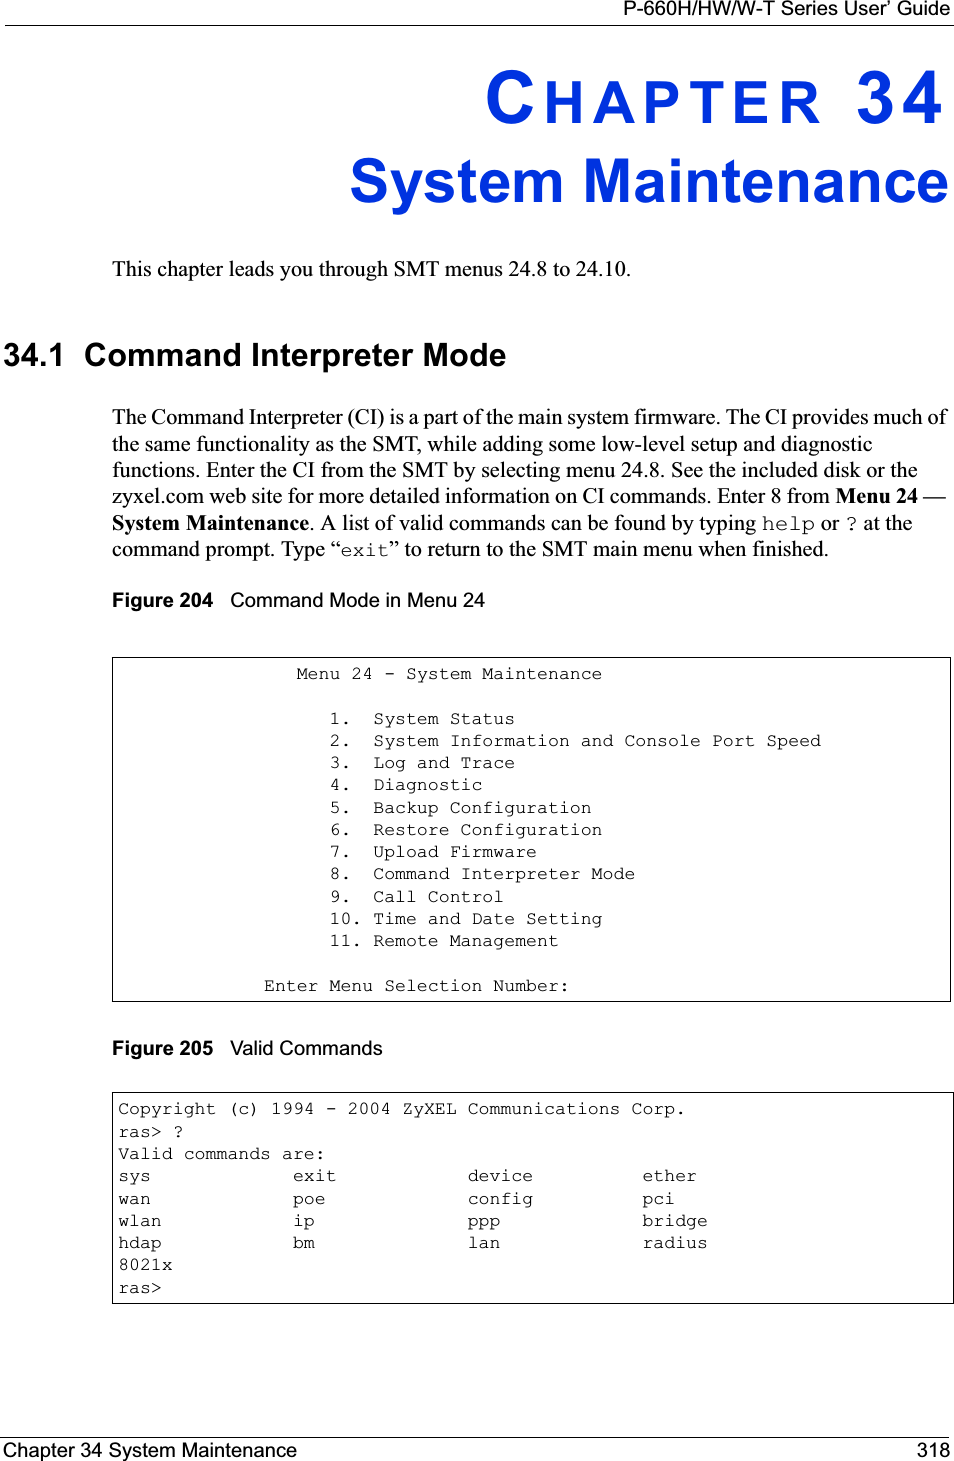 P-660H/HW/W-T Series User’ GuideChapter 34 System Maintenance 318CHAPTER 34System MaintenanceThis chapter leads you through SMT menus 24.8 to 24.10.34.1  Command Interpreter ModeThe Command Interpreter (CI) is a part of the main system firmware. The CI provides much of the same functionality as the SMT, while adding some low-level setup and diagnostic functions. Enter the CI from the SMT by selecting menu 24.8. See the included disk or the zyxel.com web site for more detailed information on CI commands. Enter 8 from Menu 24 — System Maintenance. A list of valid commands can be found by typing help or ? at the command prompt. Type “exit” to return to the SMT main menu when finished. Figure 204   Command Mode in Menu 24Figure 205   Valid Commands   Menu 24 - System Maintenance      1.  System Status      2.  System Information and Console Port Speed      3.  Log and Trace      4.  Diagnostic      5.  Backup Configuration      6.  Restore Configuration      7.  Upload Firmware      8.  Command Interpreter Mode      9.  Call Control      10. Time and Date Setting      11. Remote ManagementEnter Menu Selection Number:Copyright (c) 1994 - 2004 ZyXEL Communications Corp.ras&gt; ?Valid commands are:sys             exit            device          etherwan             poe             config          pciwlan            ip              ppp             bridgehdap            bm              lan             radius8021xras&gt;